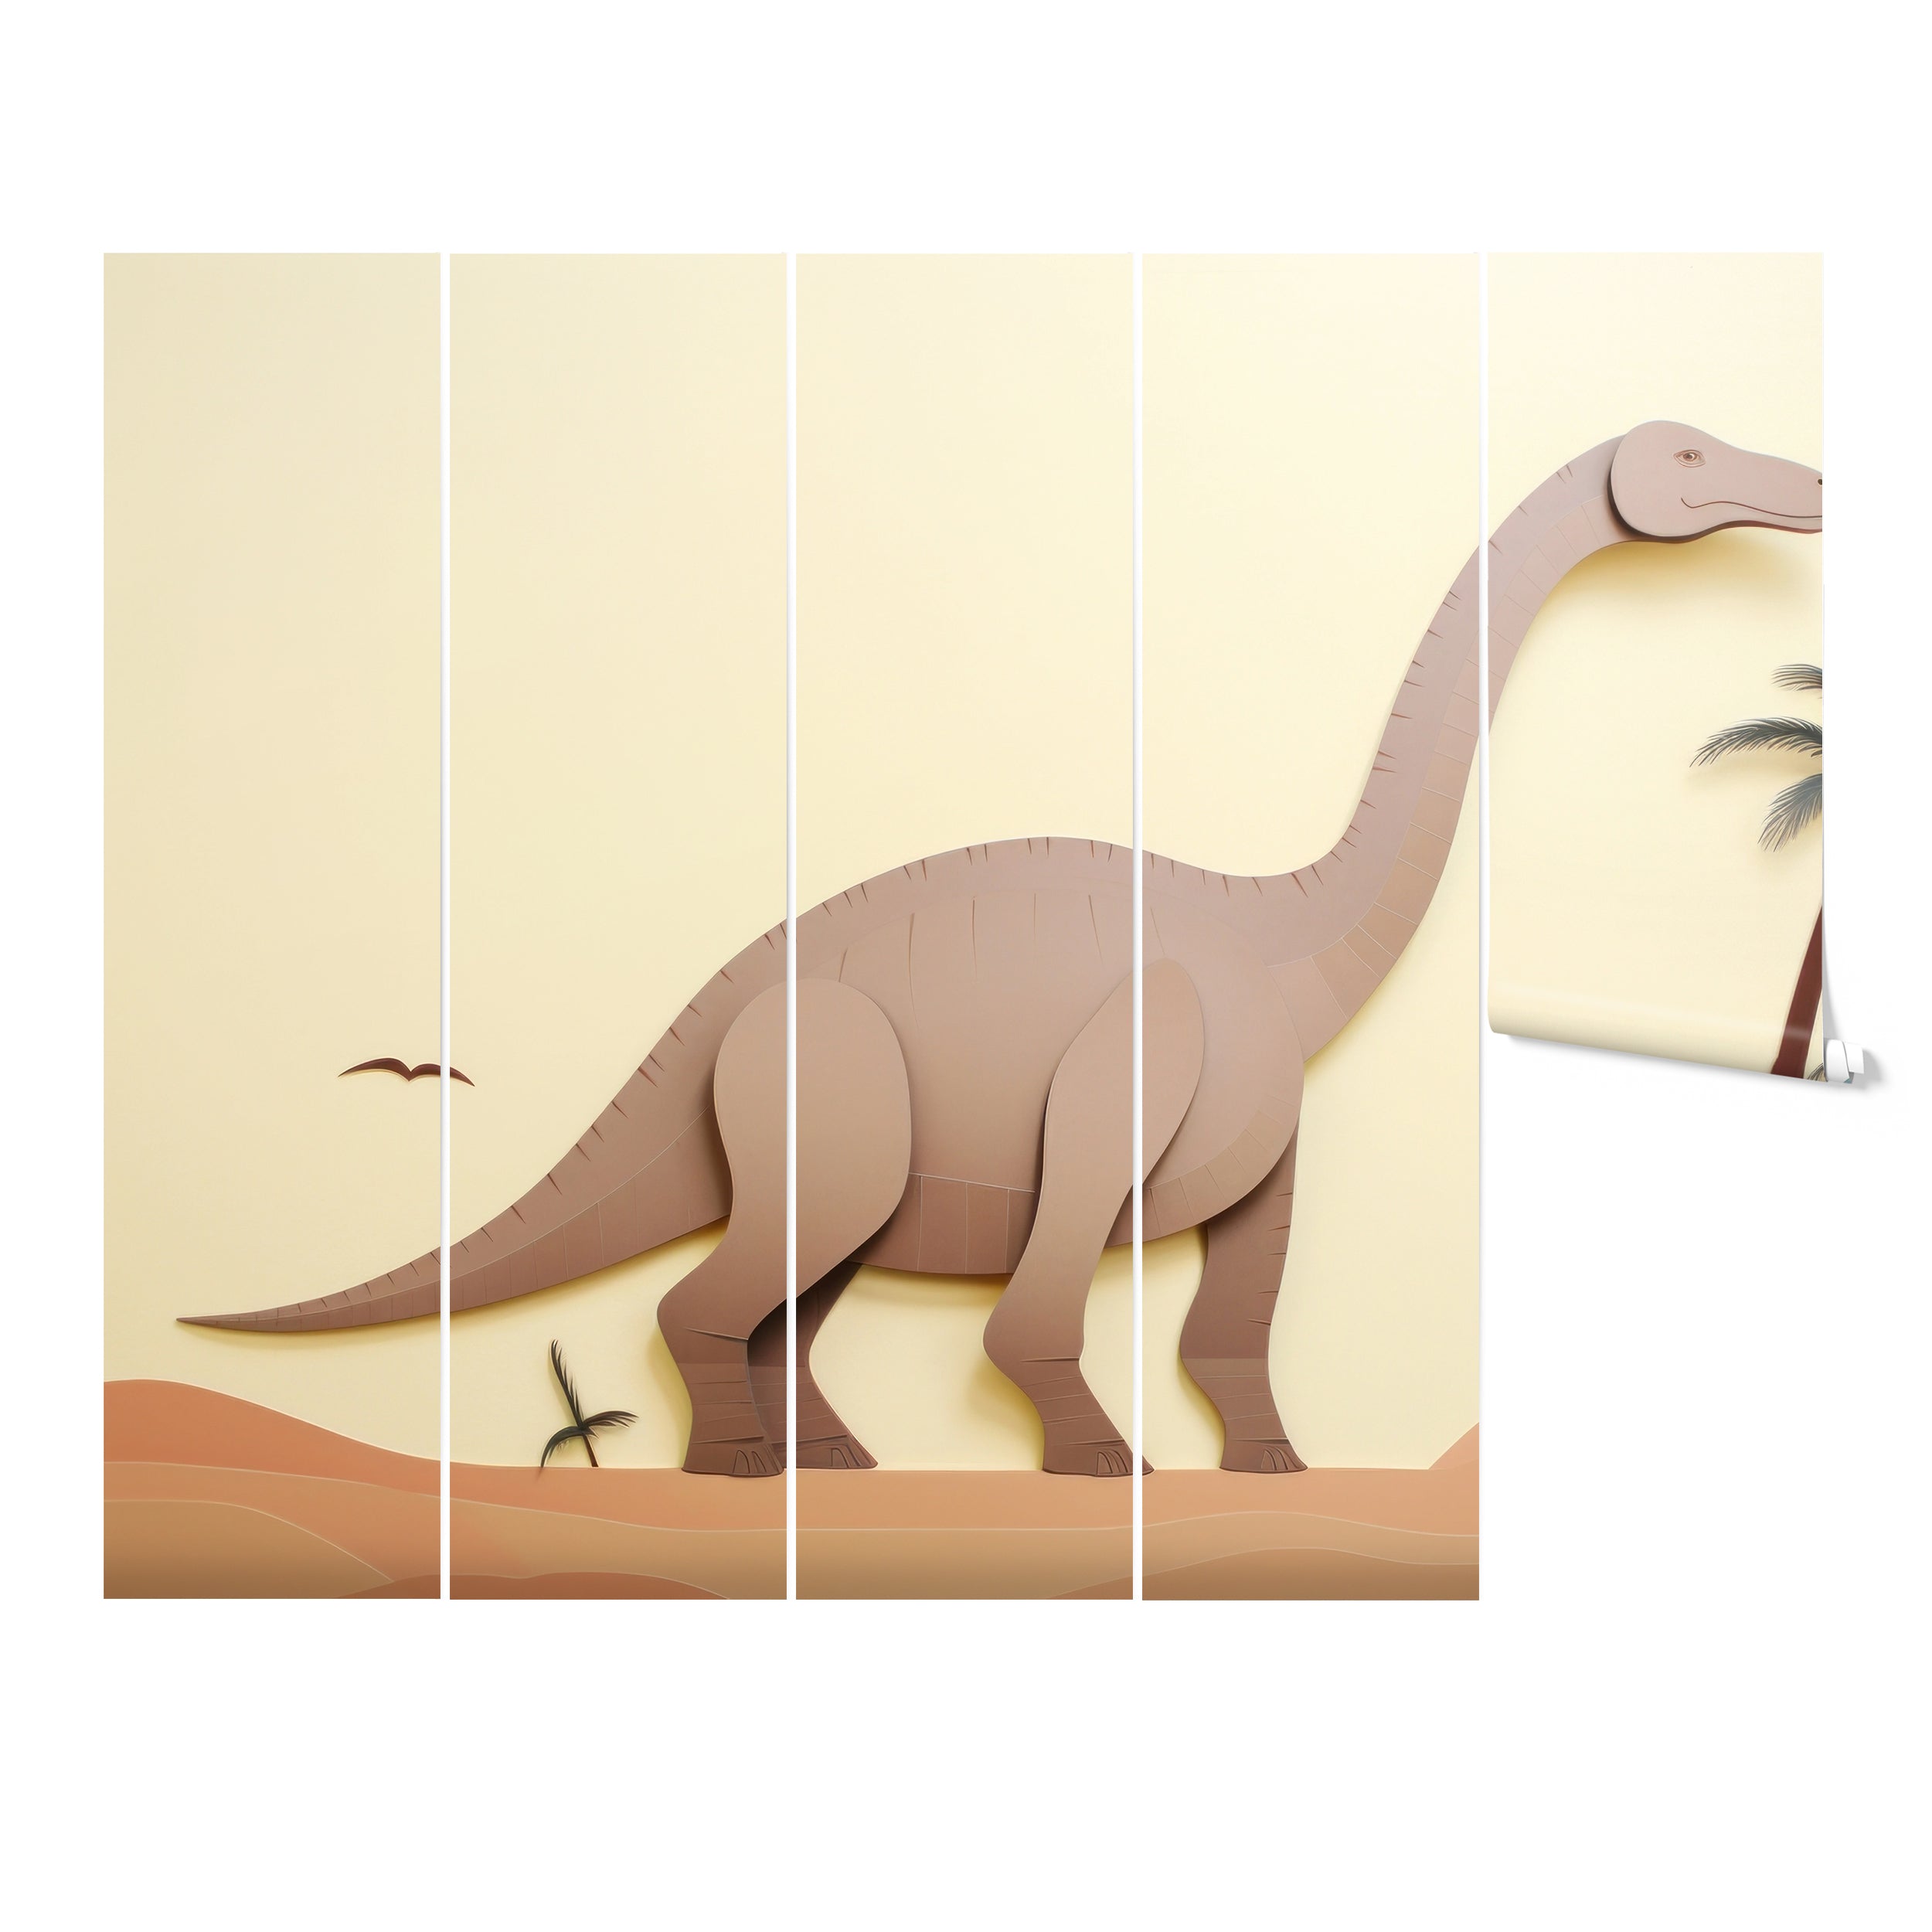 "Dinosaur Adventure wallpaper mural with a friendly dinosaur and palm trees in a playful design."